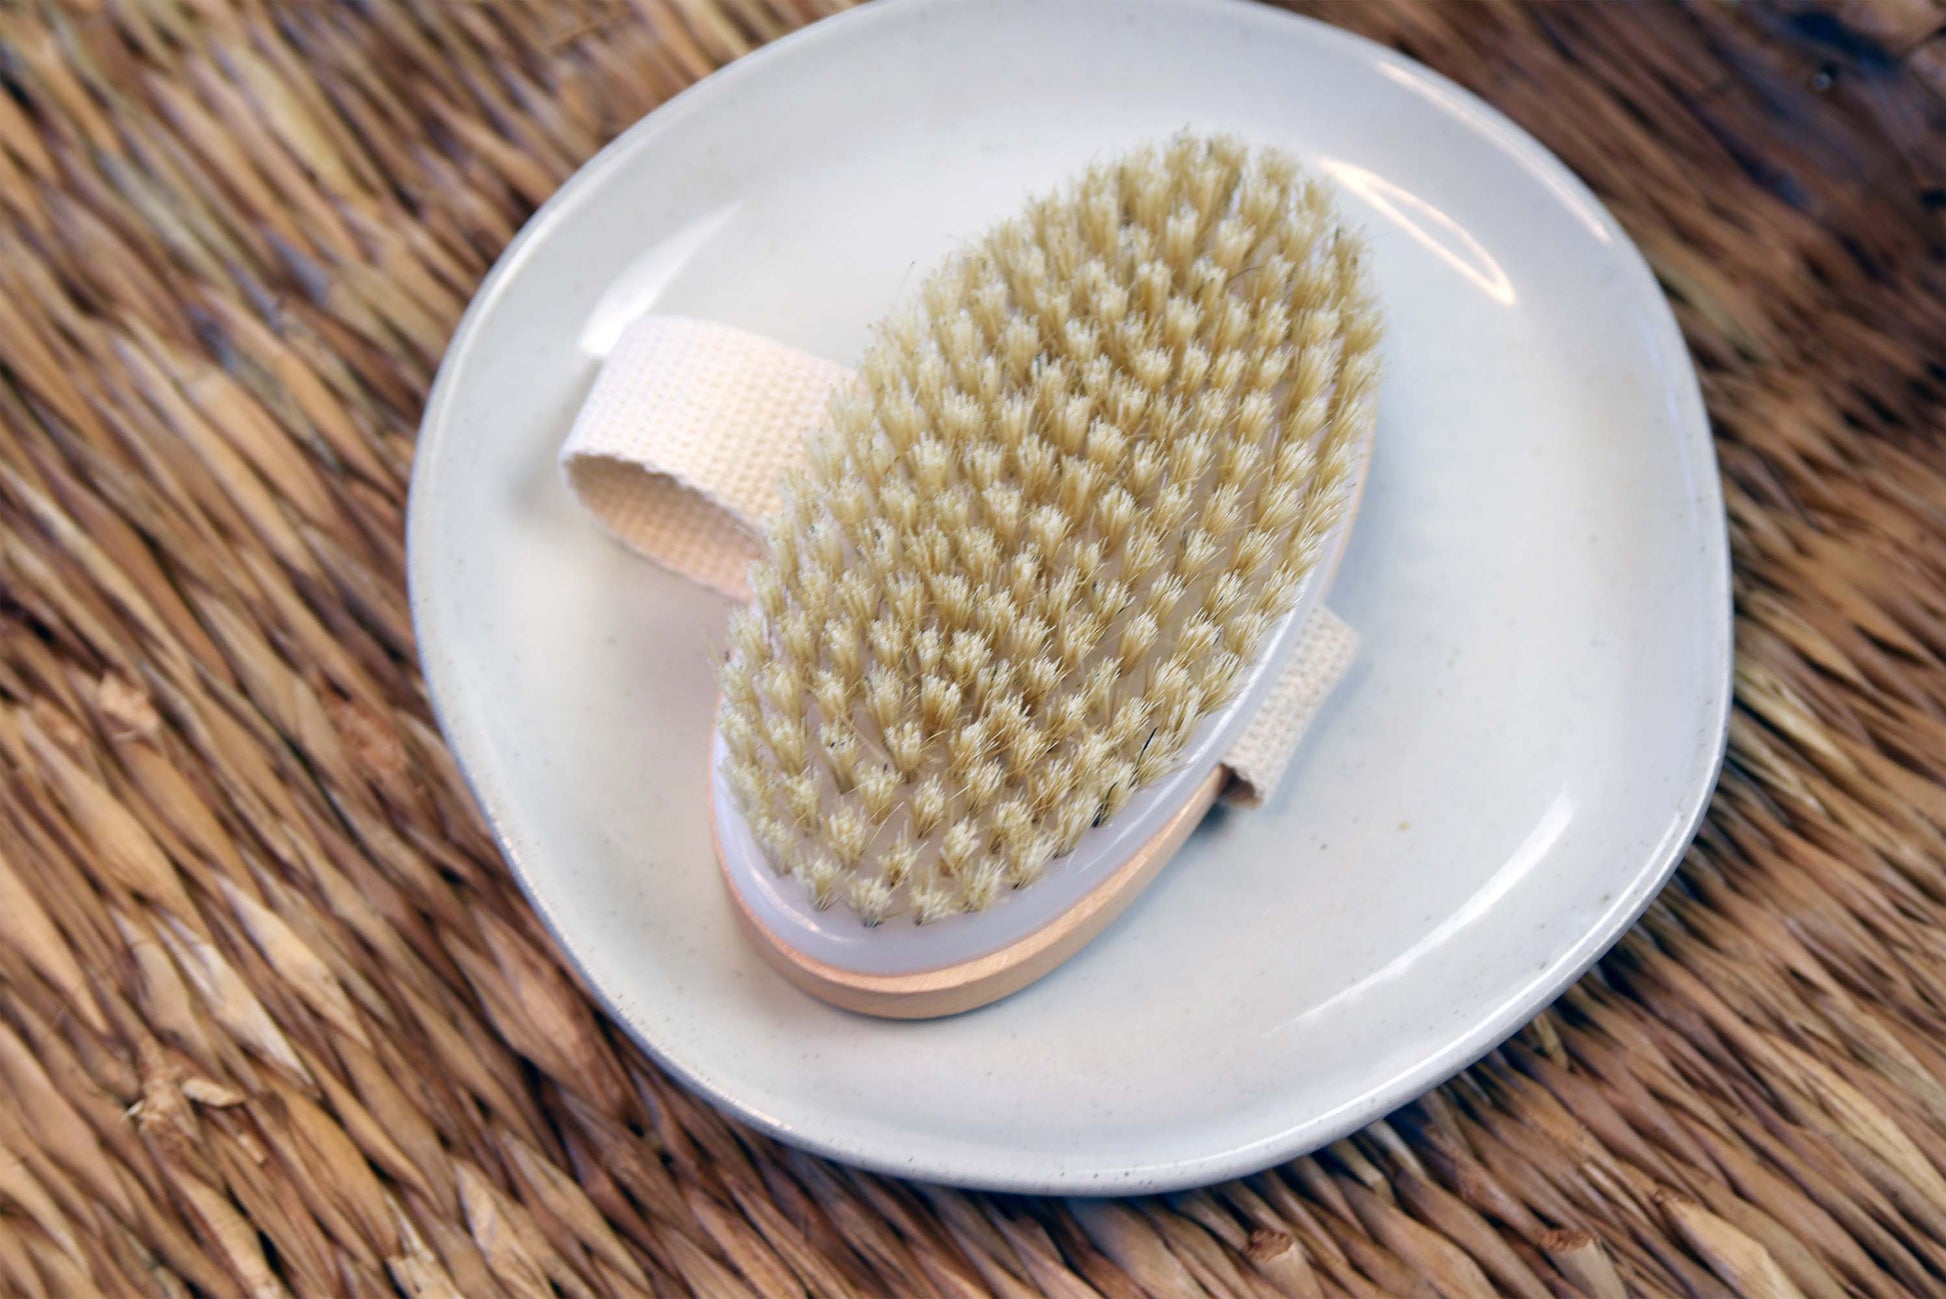 exfoliating body dry brush for improved circulation, reduced cellulite, wellness, self-care